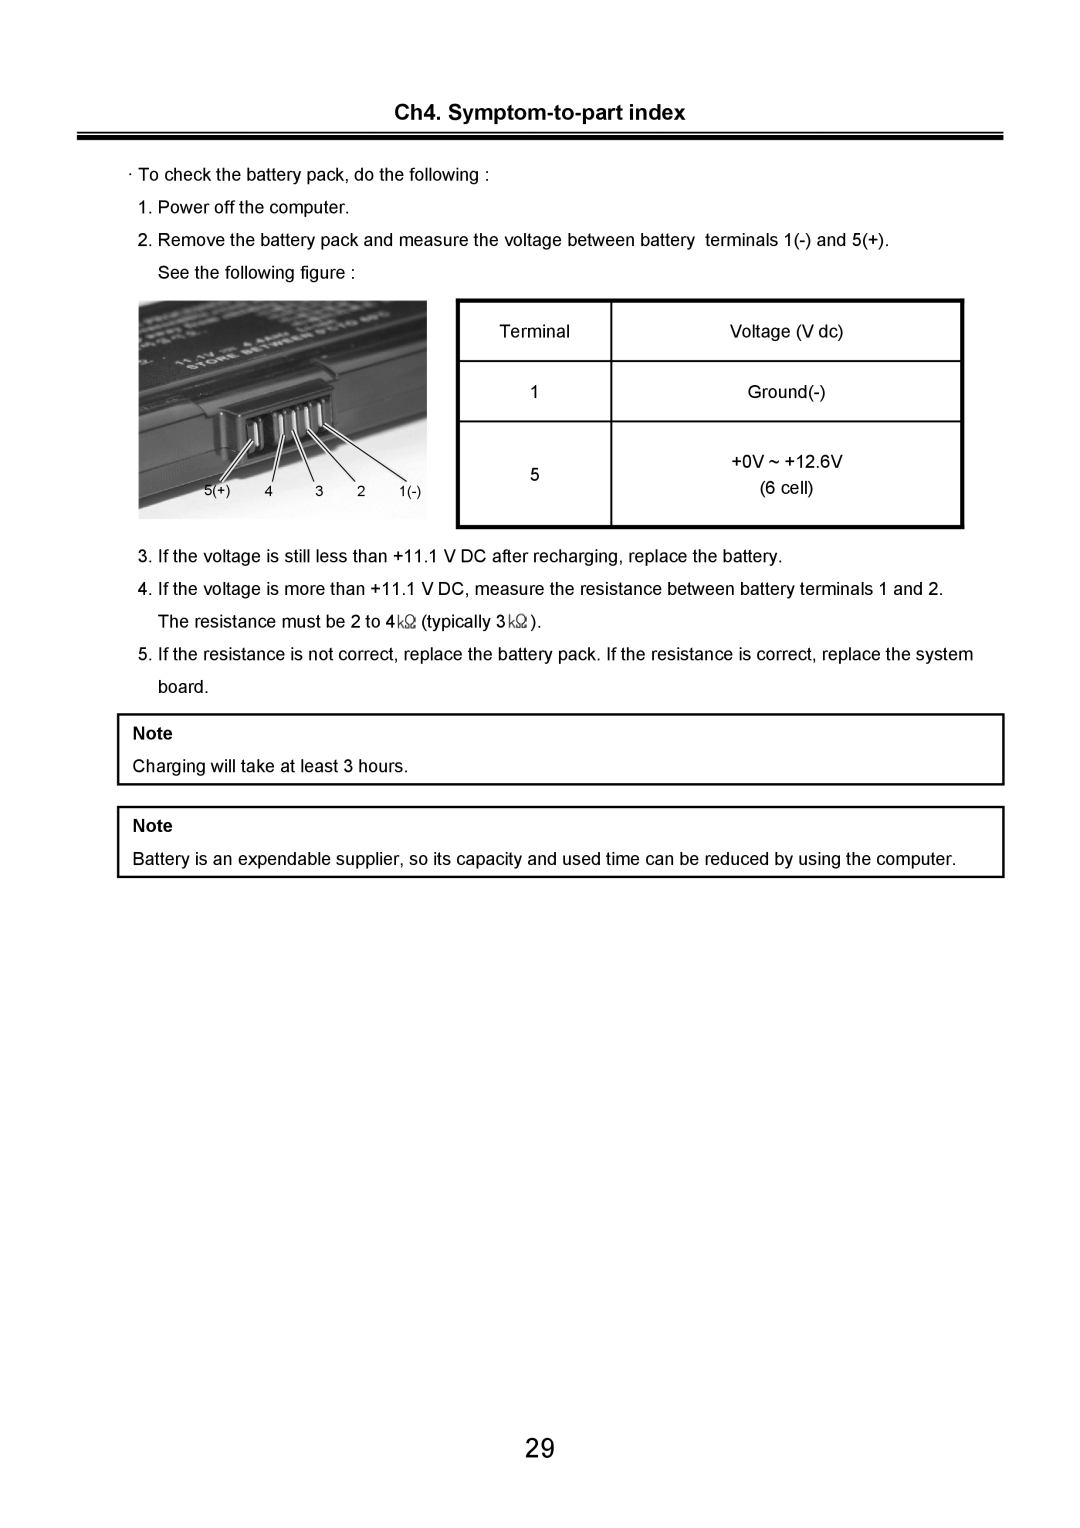 LG Electronics LS70 service manual Ch4. Symptom-to-part index, · To check the battery pack, do the following 